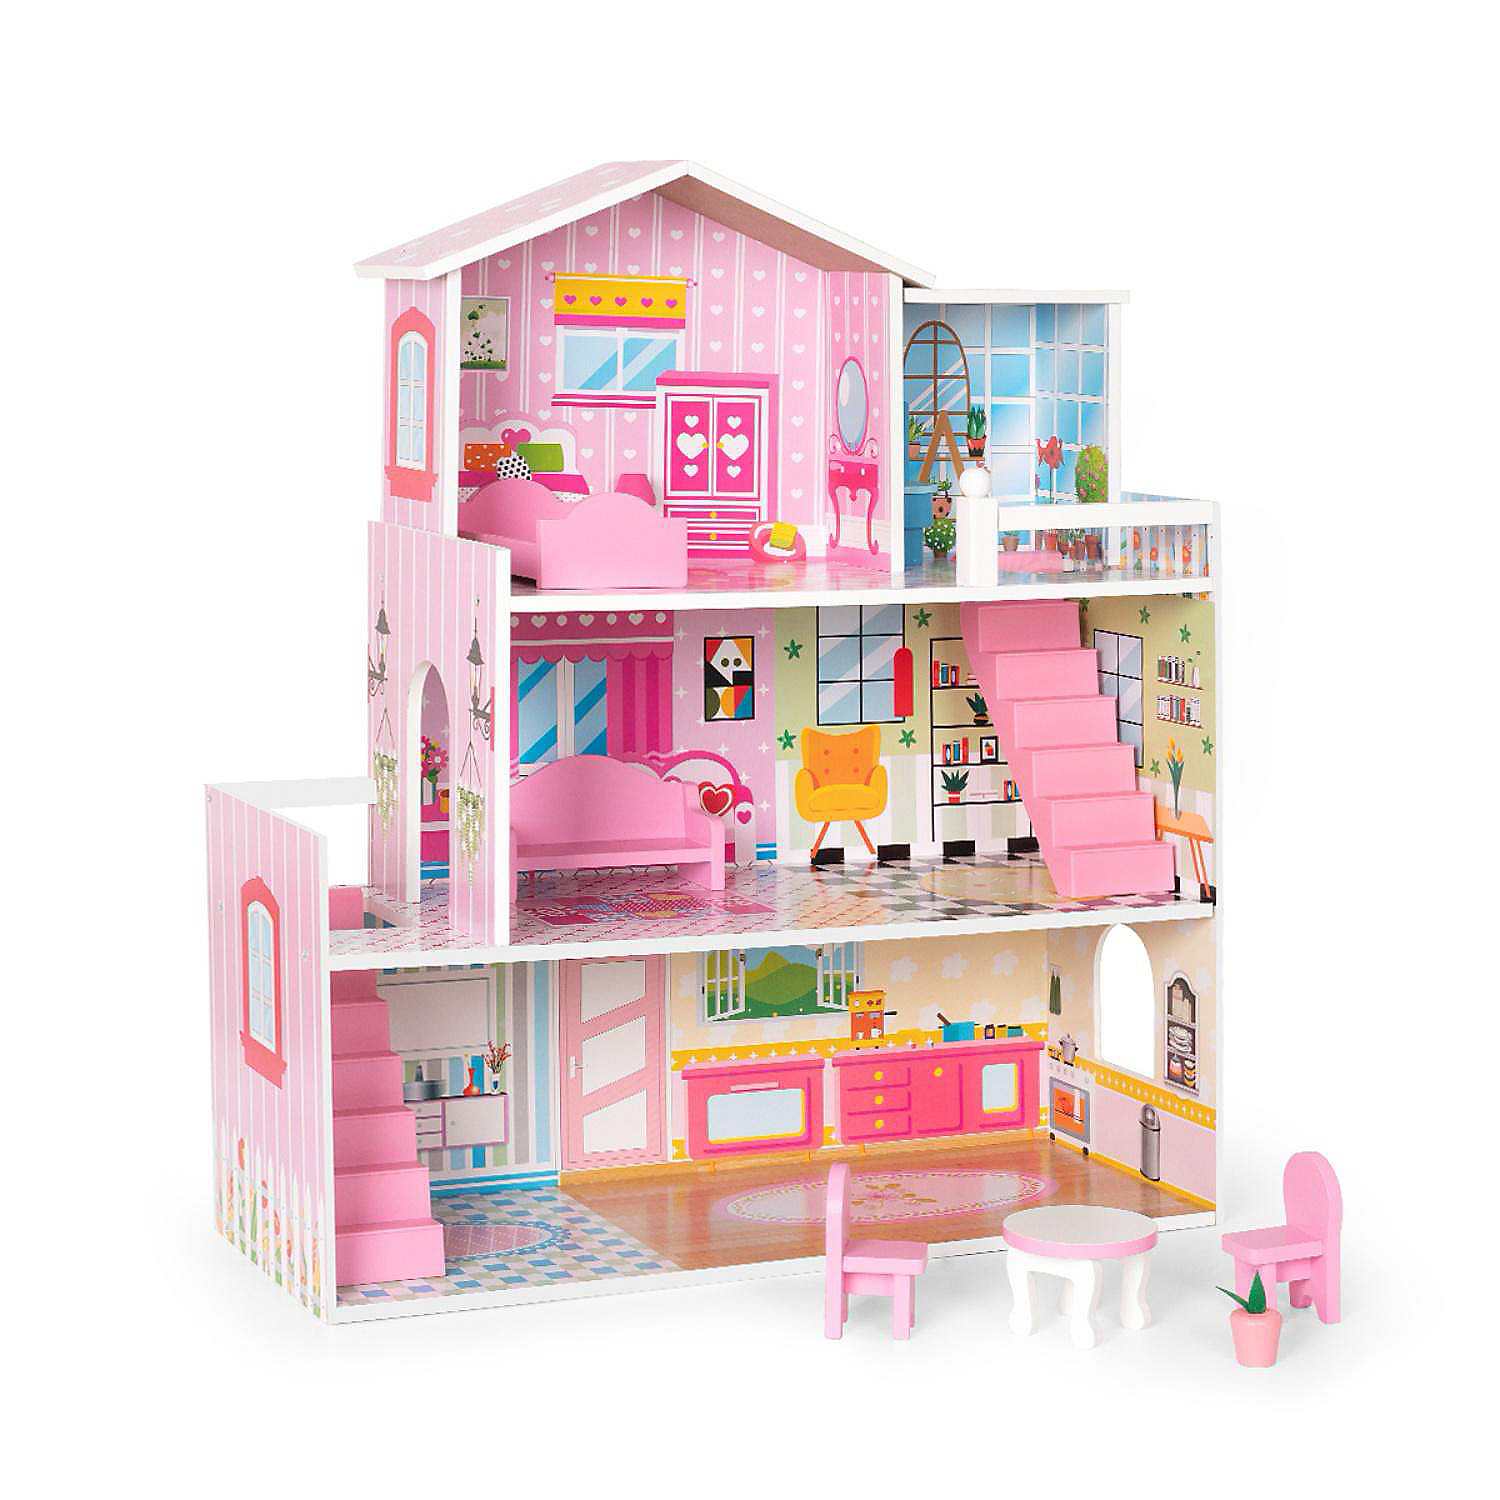 Big Wooden Dollhouse with Furniture - Play Set Gift for Kids, Girls - Pink